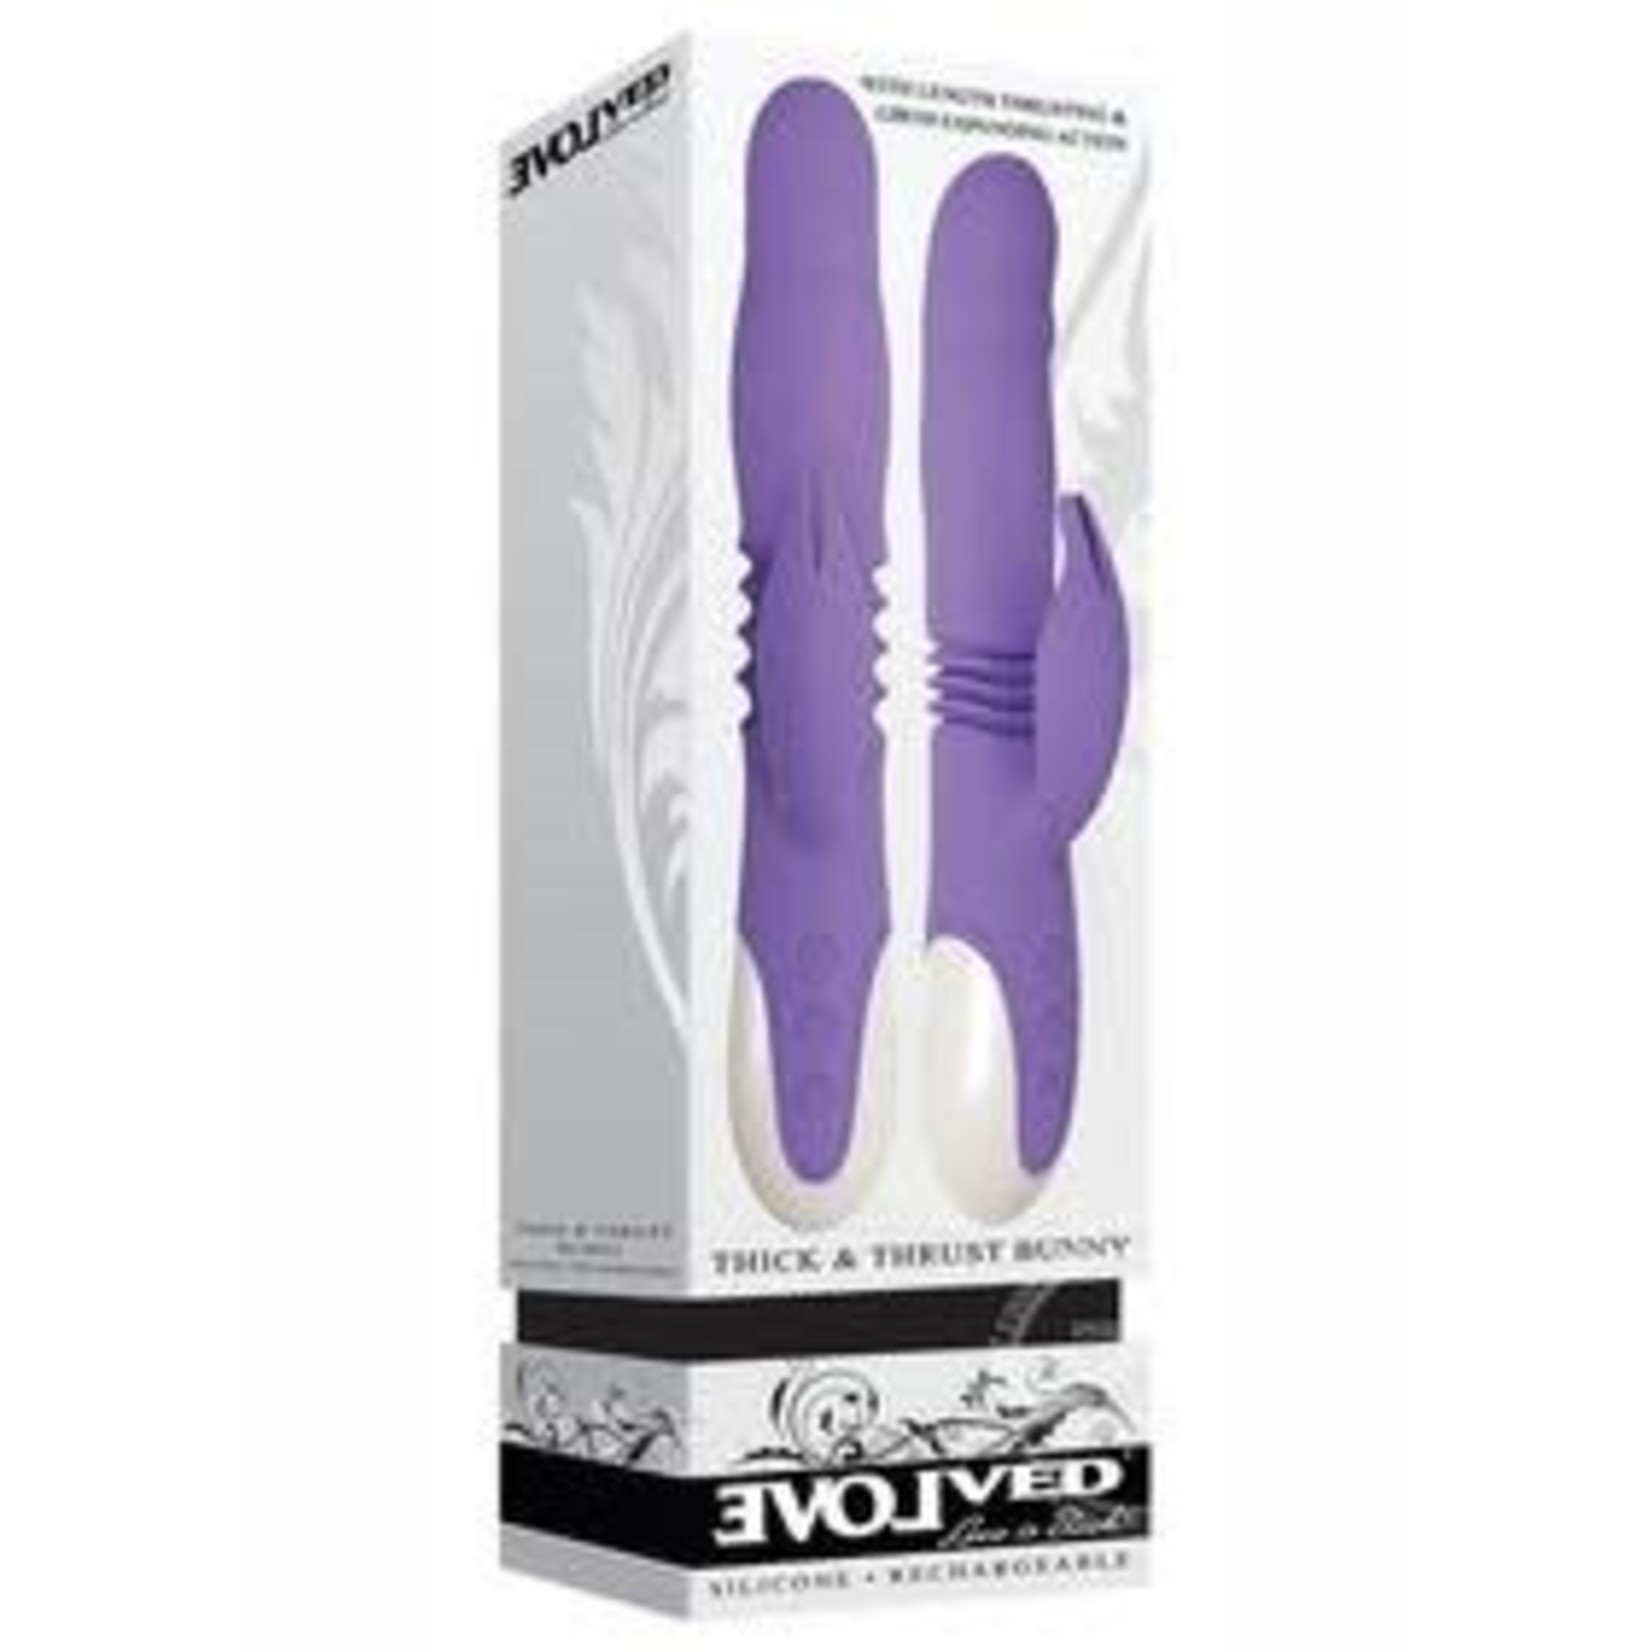 Thick & Thrust Bunny Rechargeable Silicone Rabbit Vibrator With Length Thrusting And Girth Expanding Action - Lavender